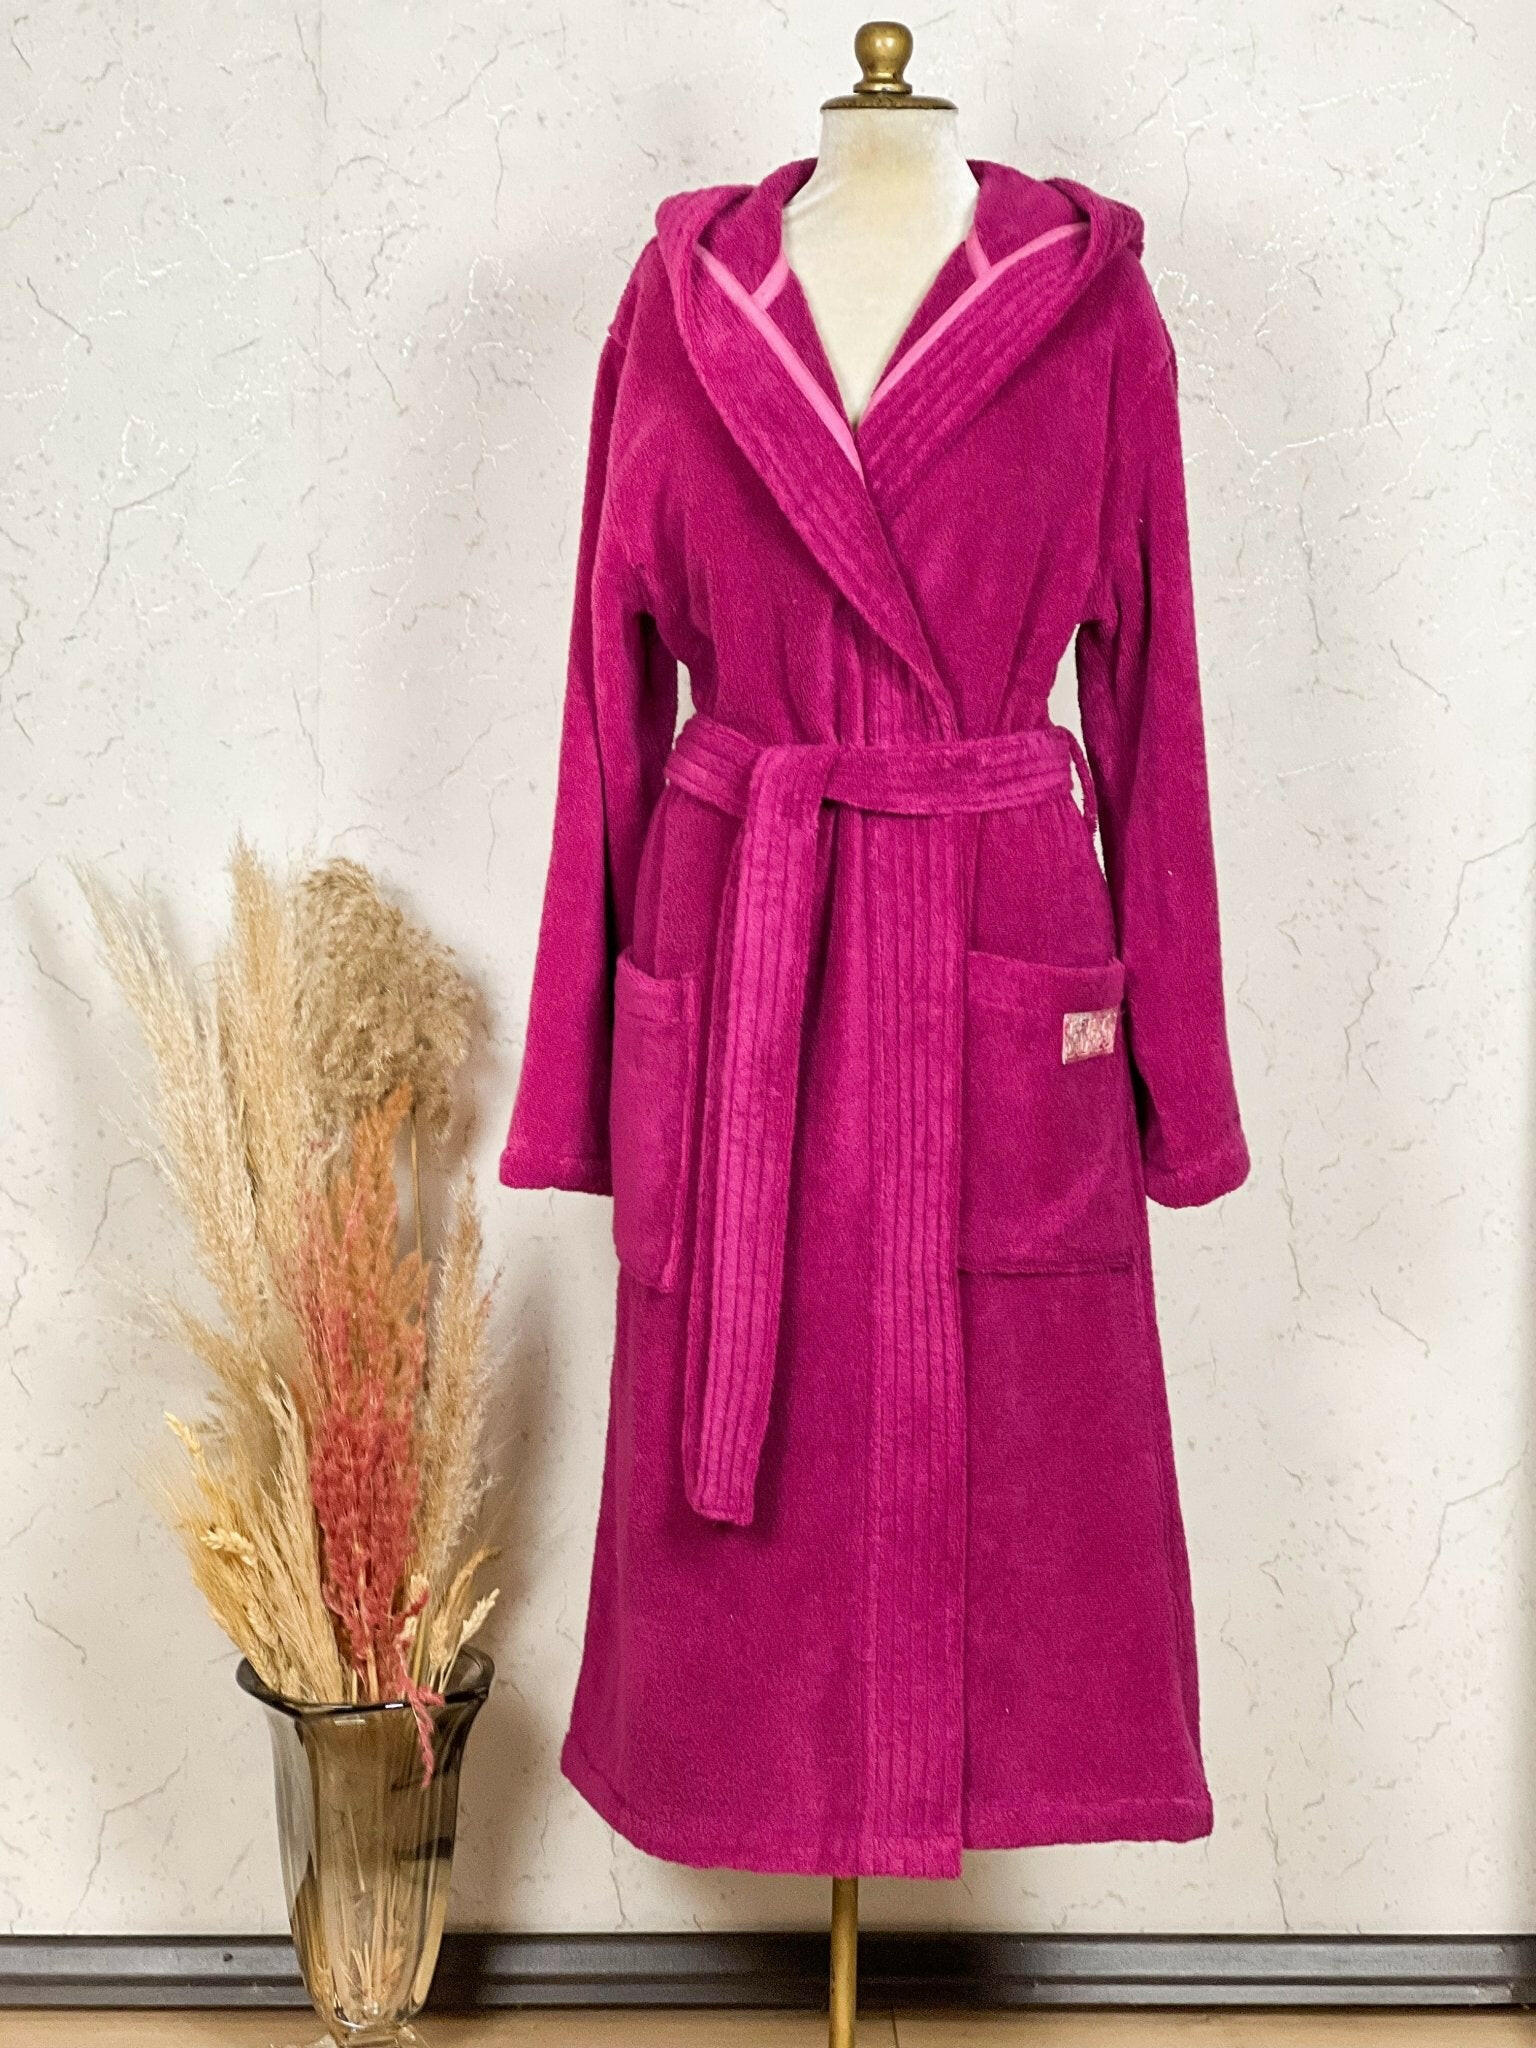 Akay Women's Pink Hooded Bathrobe, Best Luxury Micro Cotton Soft Turkish Robe Gown by Creative Home